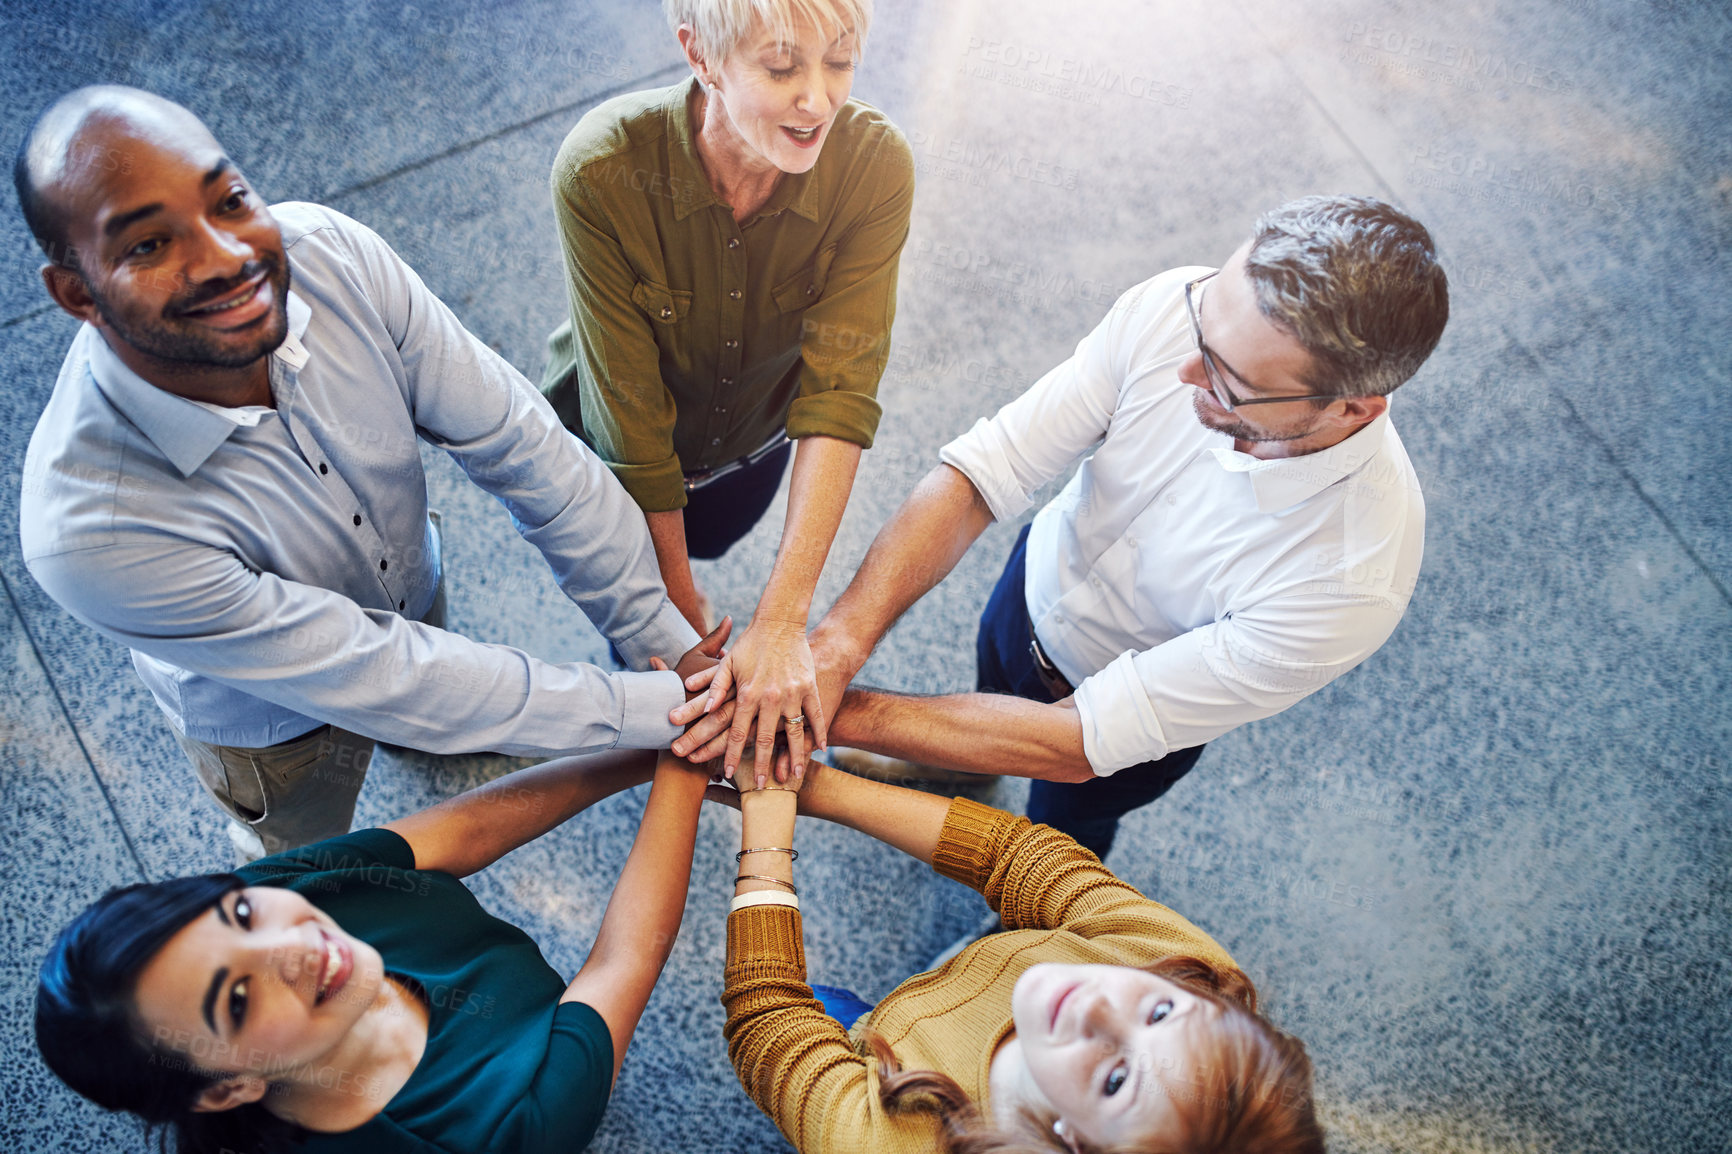 Buy stock photo Teamwork, unity and collaboration by hands joining in support of a mission, goal or vision. Portrait of diverse colleagues during team building, showing trust, community and global power together